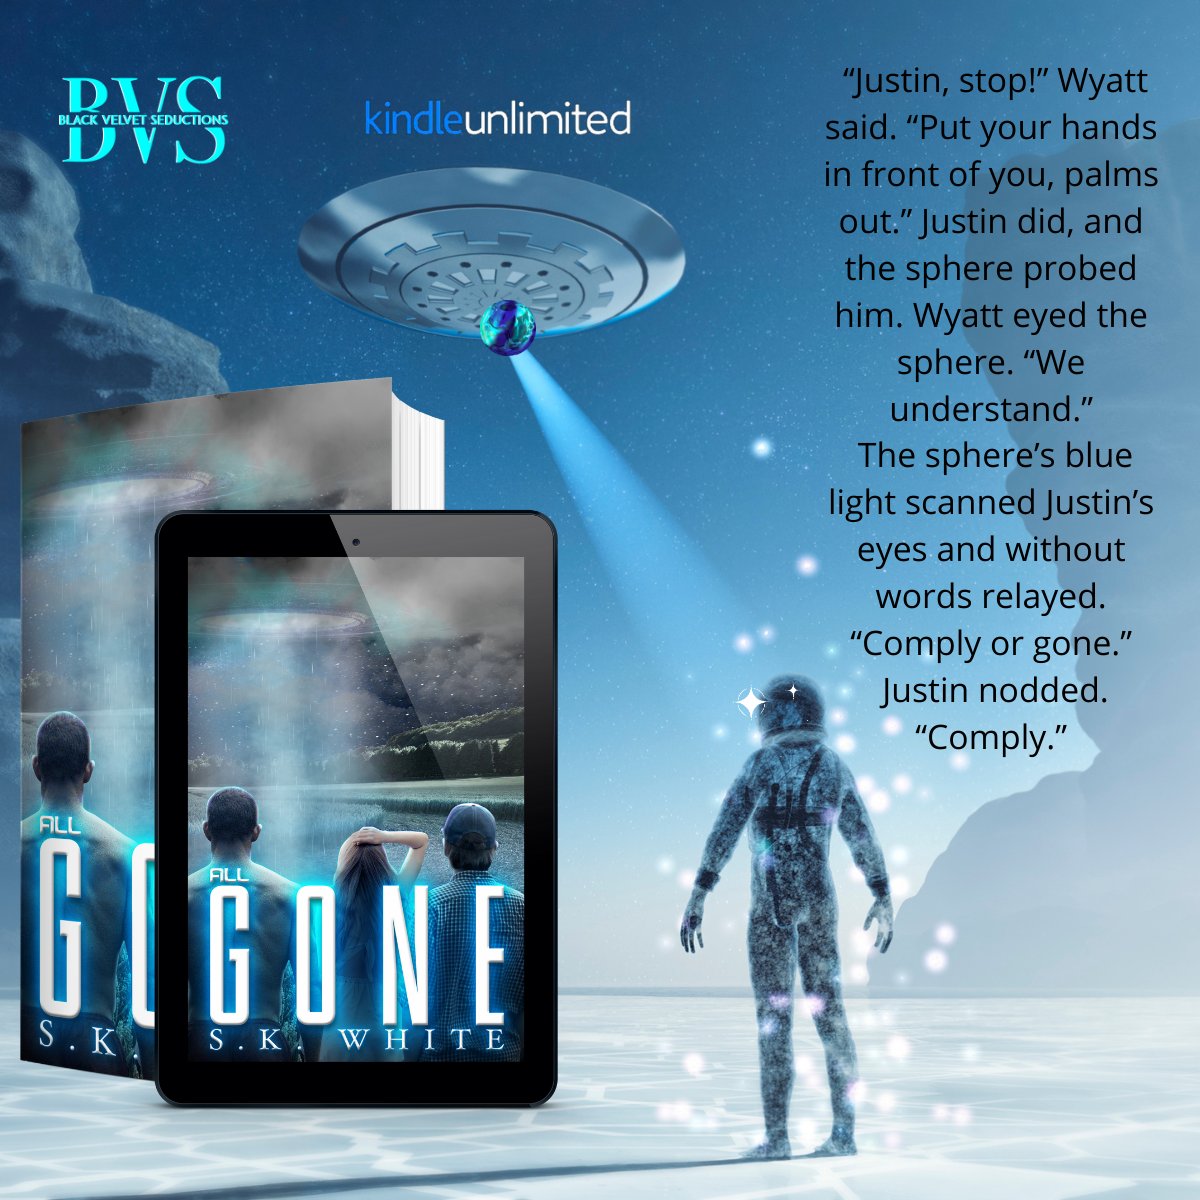 ALL GONE by S.K. White. EXCERPT: “What do the aliens want?”
amzn.to/3DWgtwS?fbclid…
 linktr.ee/skwhite 
#scifibooks #scifialien #scifimystery #scifisuspense #scifithriller #kindleunlimited #dystopianfuture #scifidystopian #dystopian #scifi